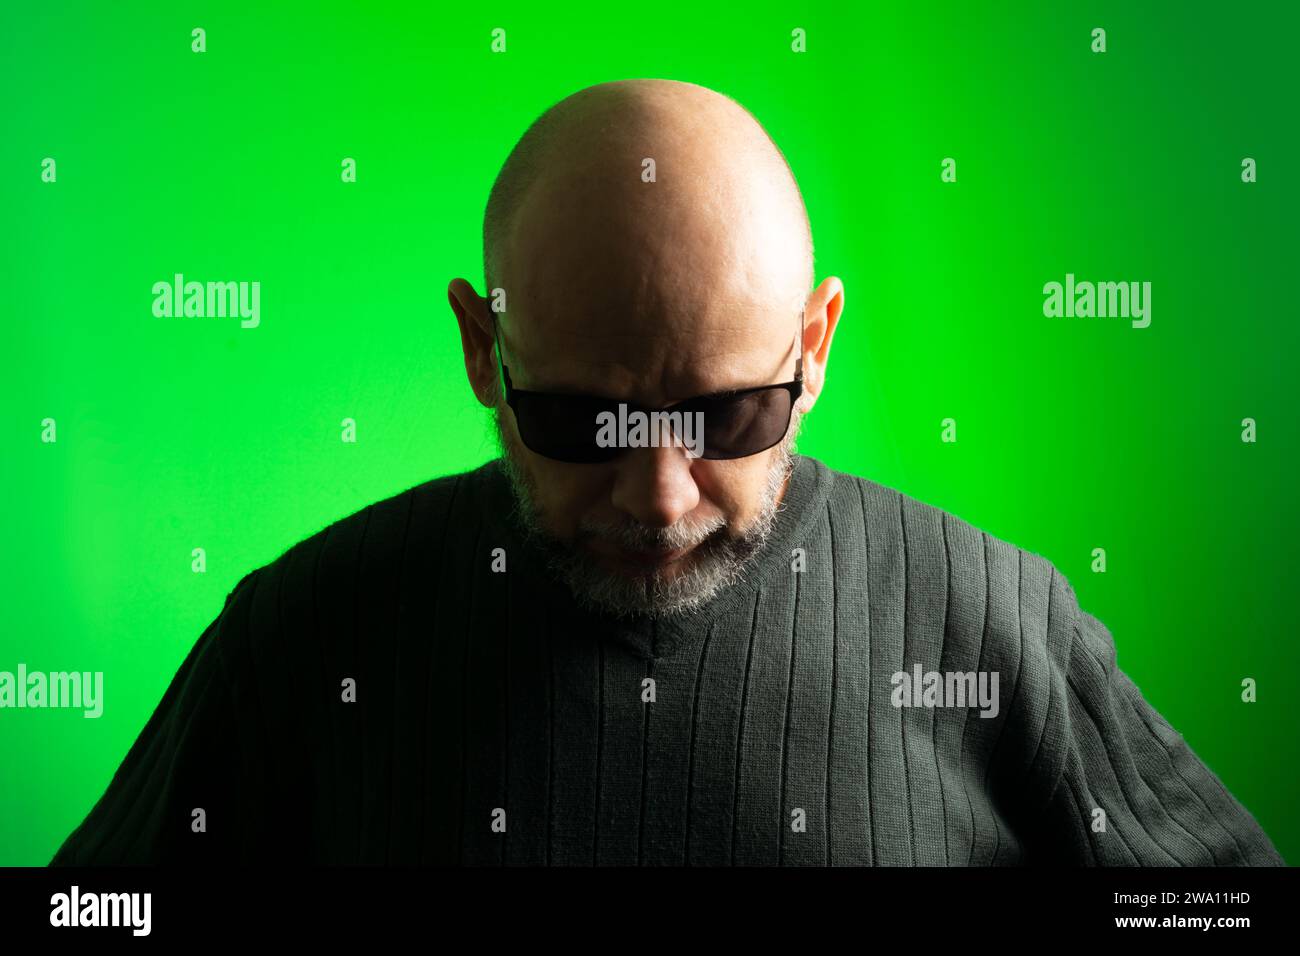 White man, bald, wearing sunglasses, serious and thoughtful looking down. Isolated on green background. Stock Photo